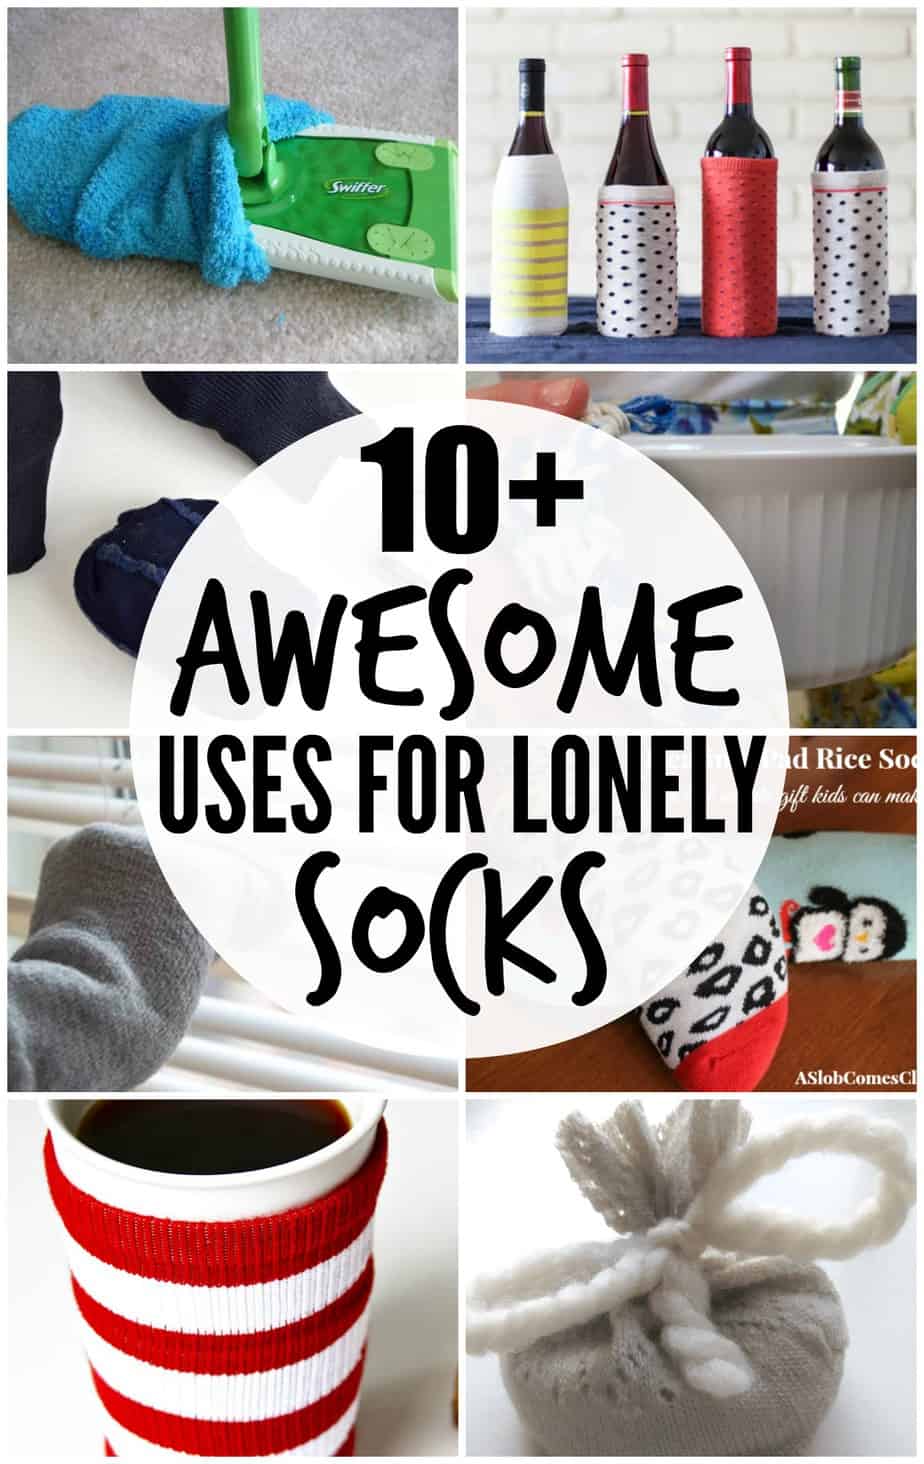 Awesome Uses for lonely Socks